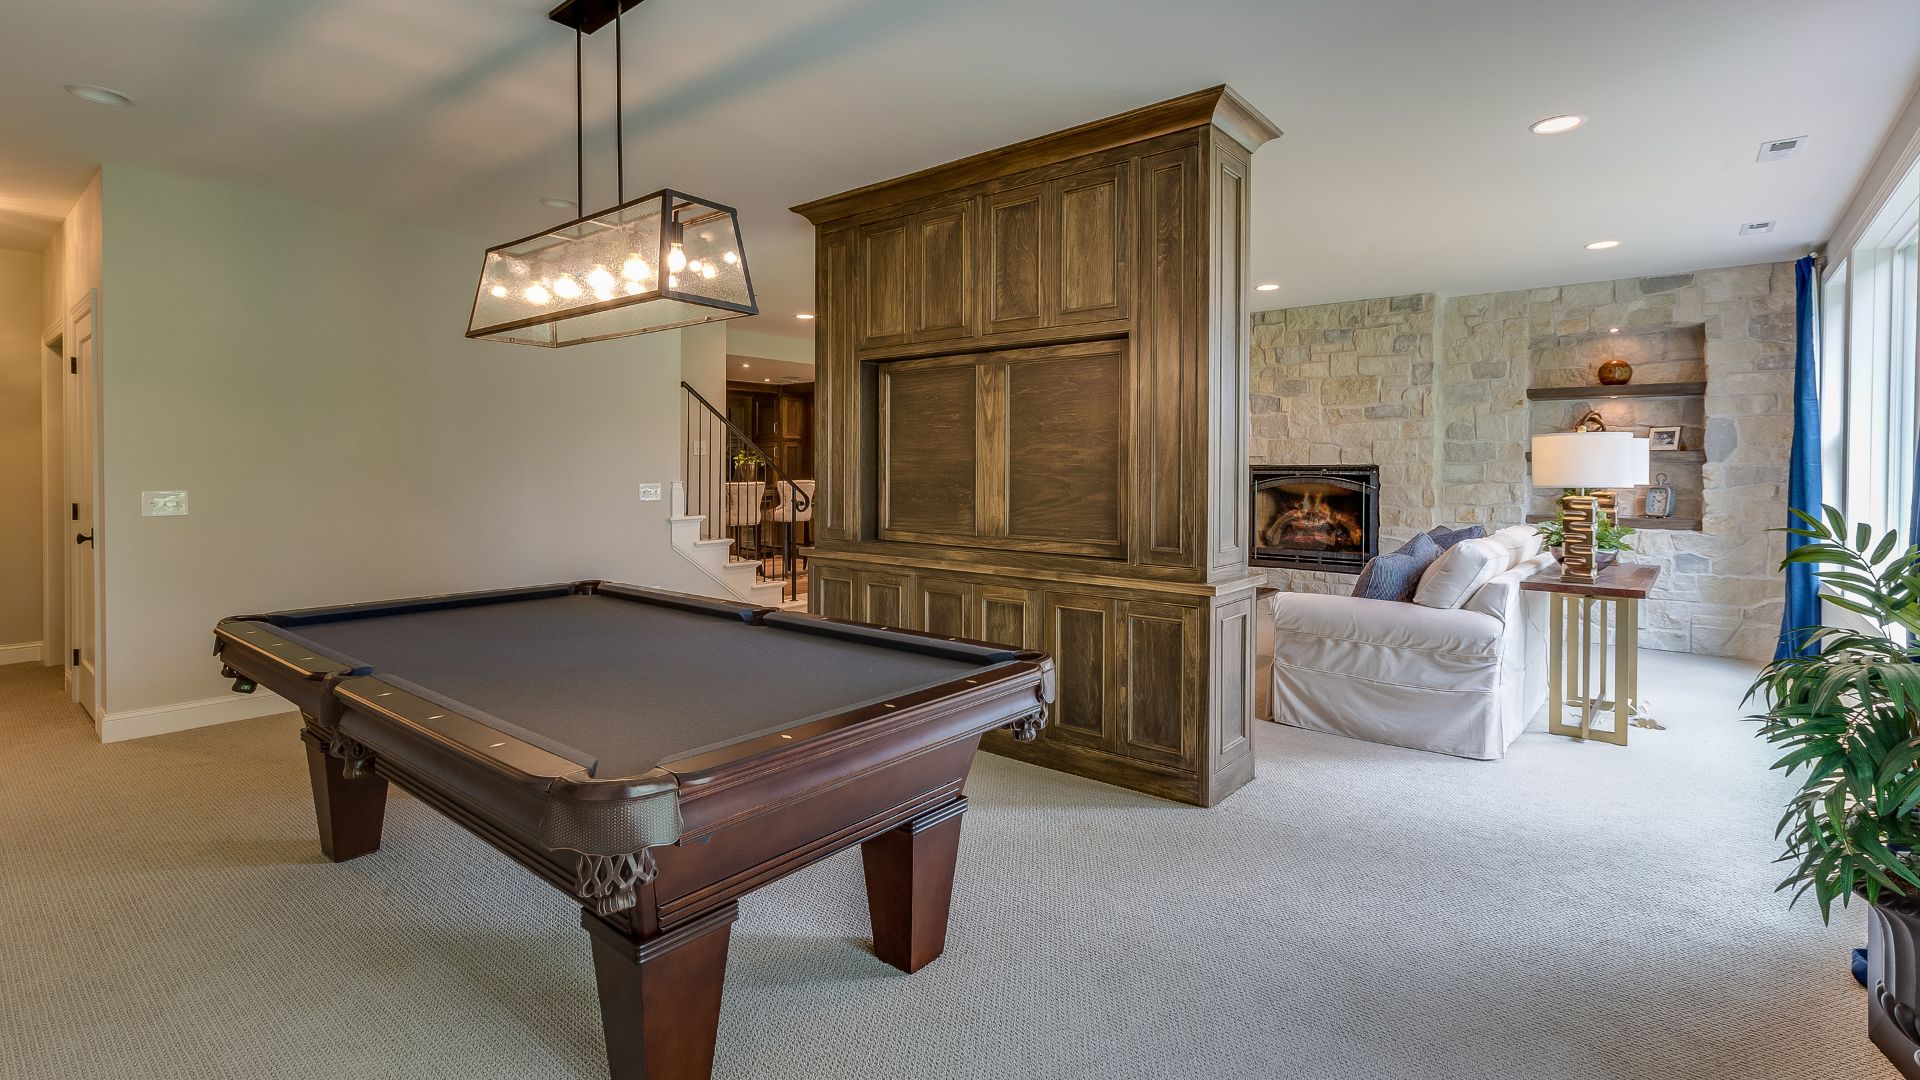 Basement Entertainment Area with billiard pool, and tall brown cabinet